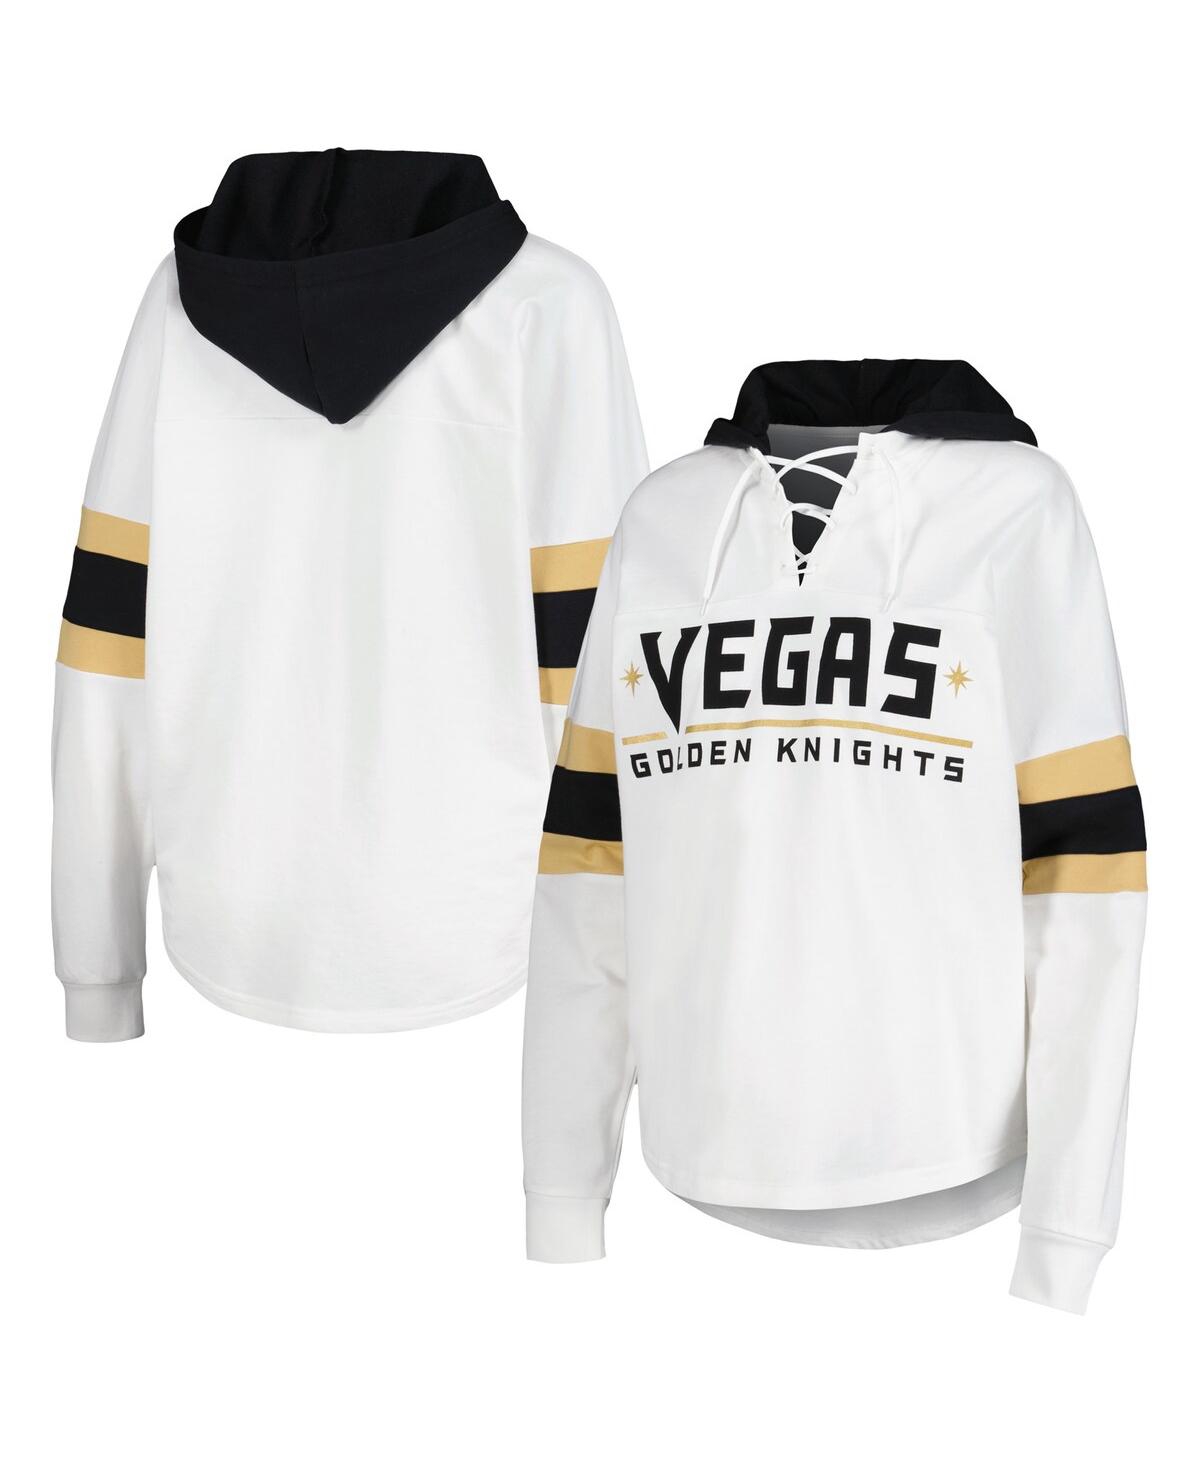 Women's G-iii 4Her by Carl Banks White, Black Vegas Golden Knights Goal Zone Long Sleeve Lace-Up Hoodie T-shirt - White, Black